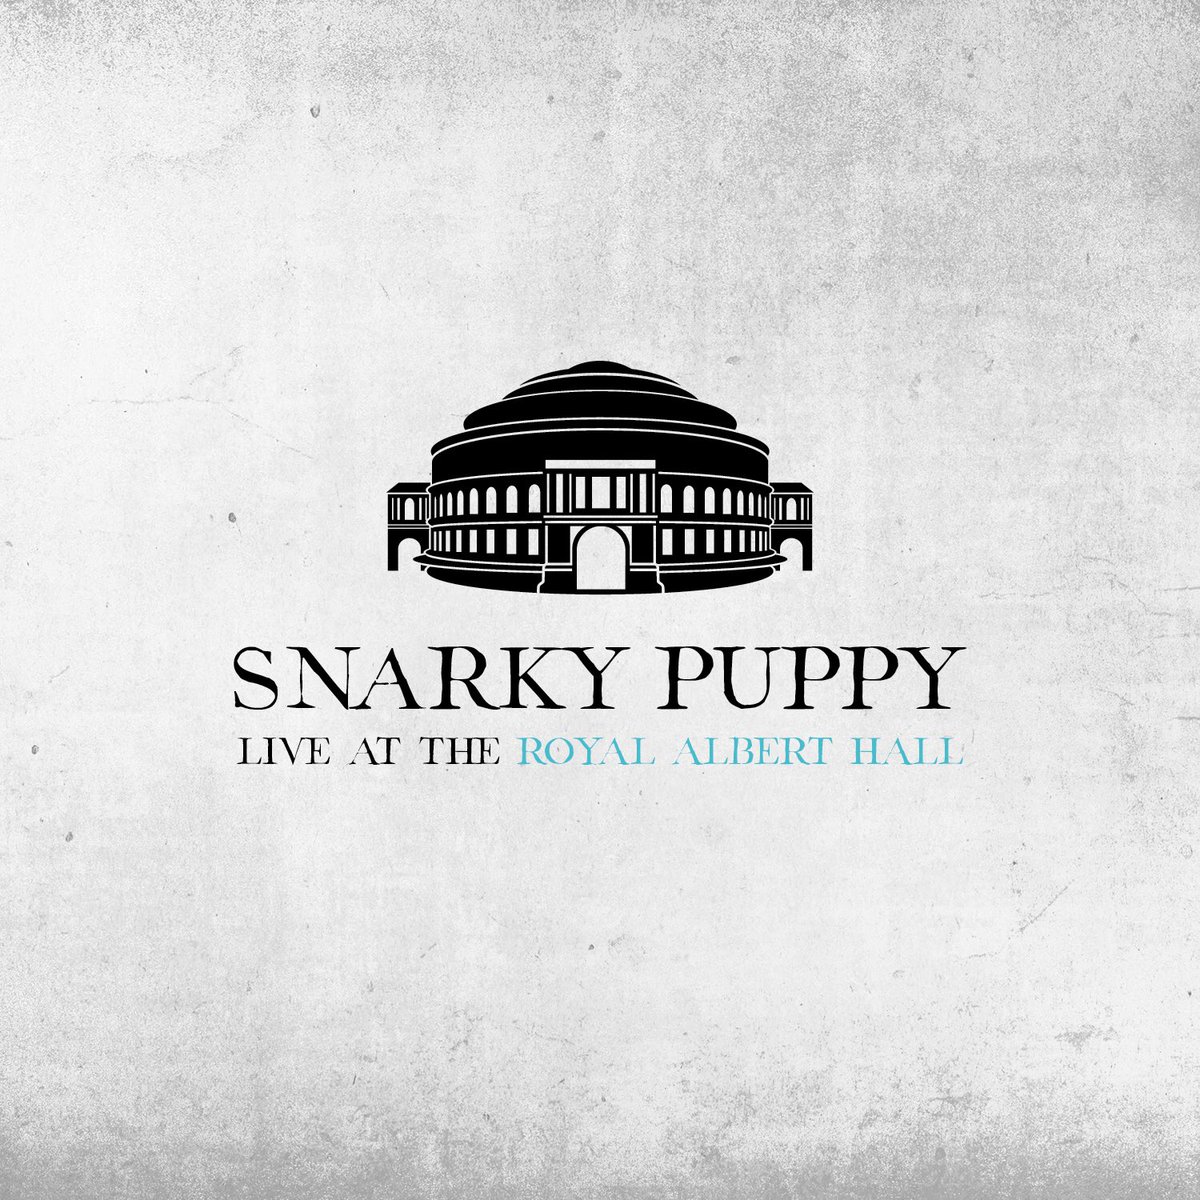 Snarky Puppy On Twitter Announcement We Will Record